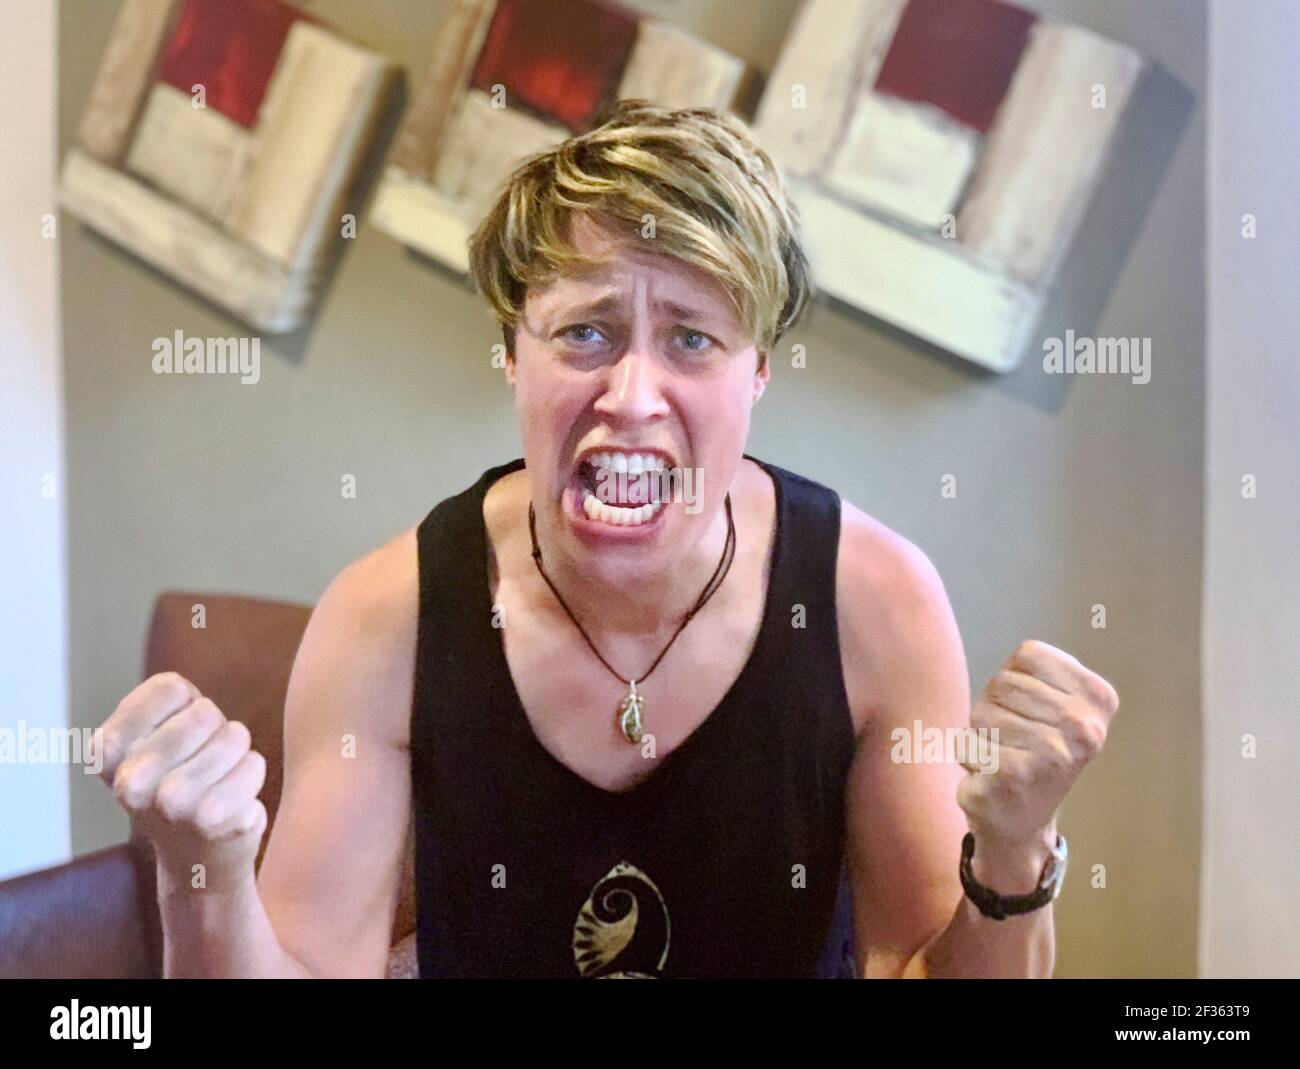 Portrait of young woman in high intensity pure anger and rage, screaming, fists clutched. Stock Photo